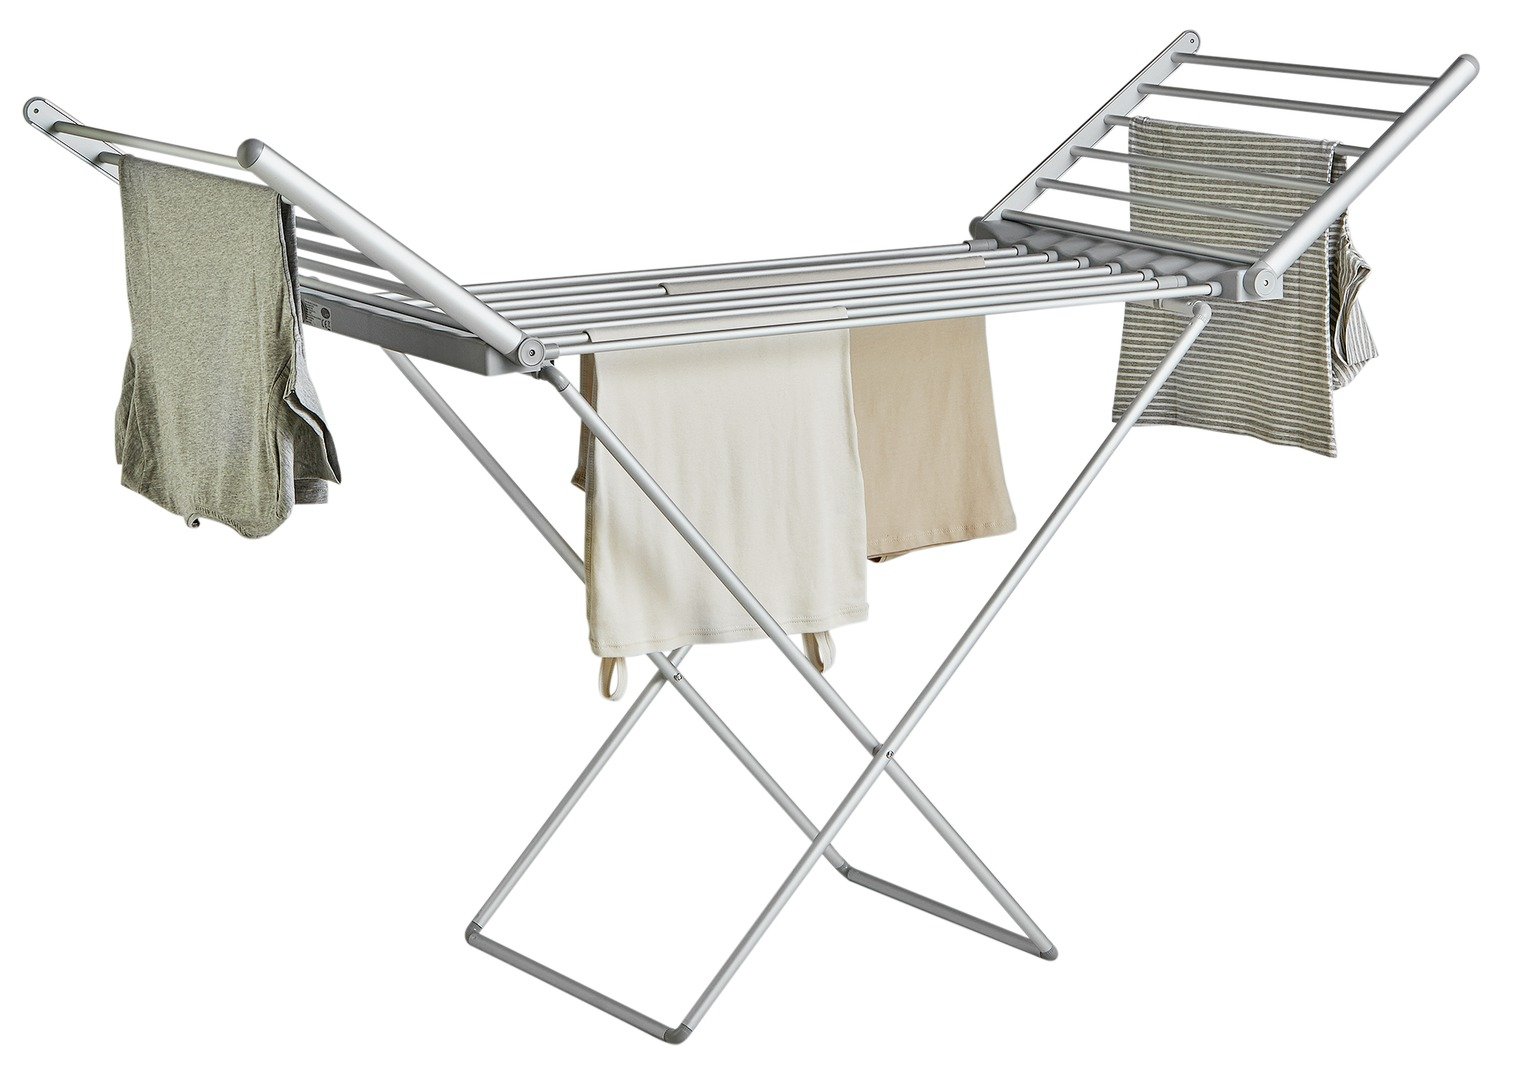 Argos Home 11.5m Heated Electric Indoor Clothes Airer review